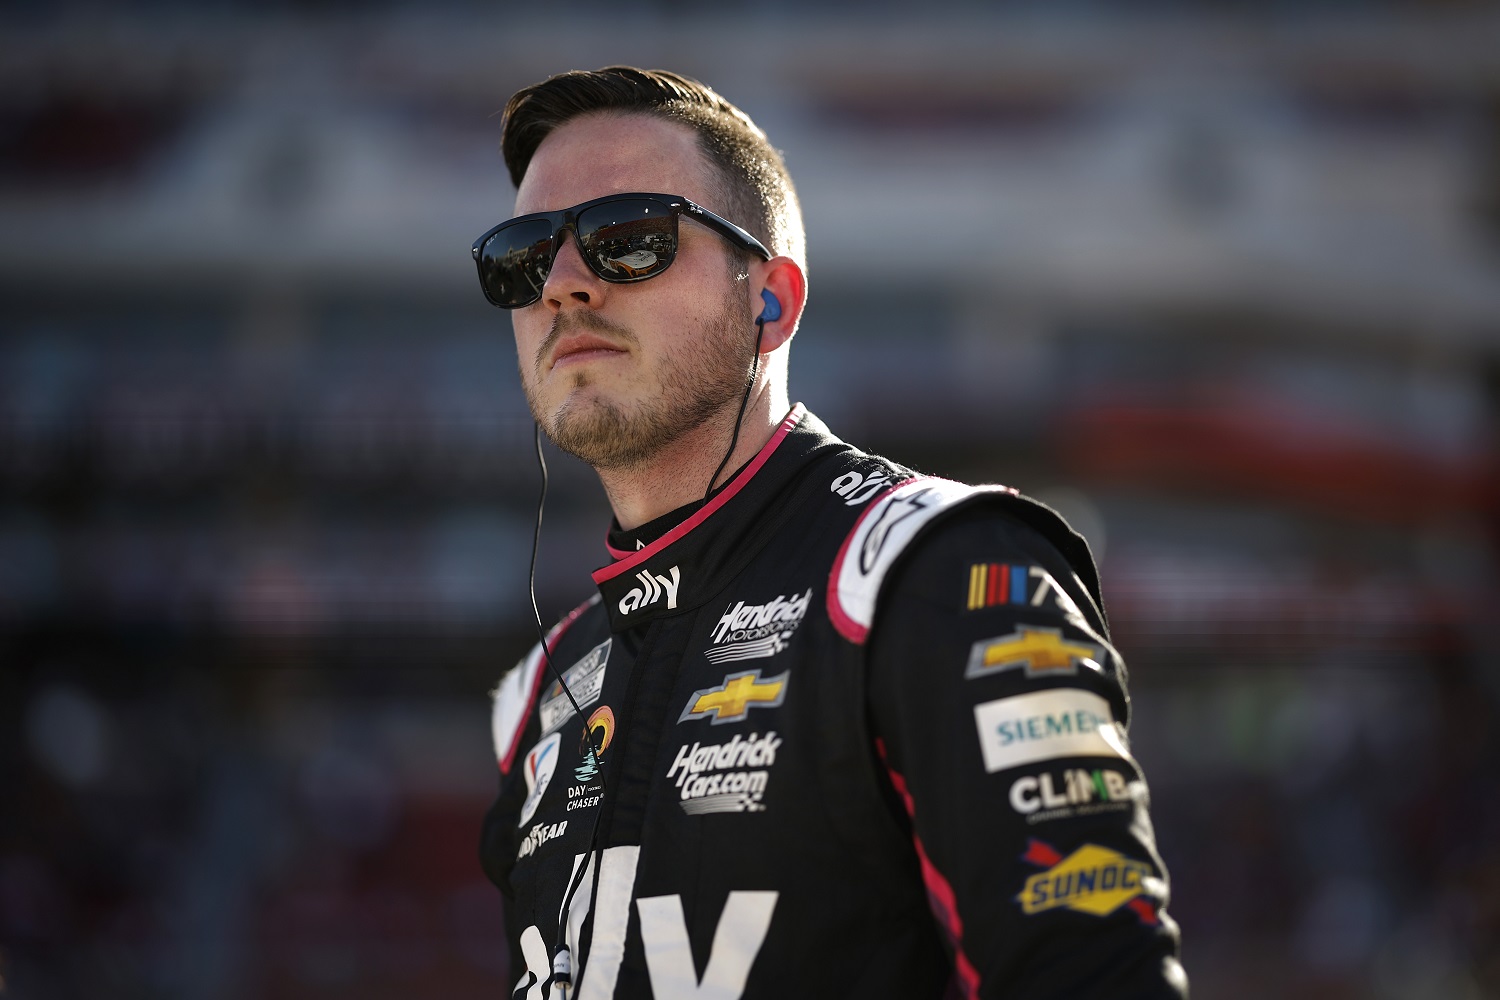 Alex Bowman, driver of the No. 48 Ally Chevrolet, looks on during qualifying heats for the NASCAR Busch Light Clash on Feb. 5, 2023. | Chris Graythen/Getty Images)